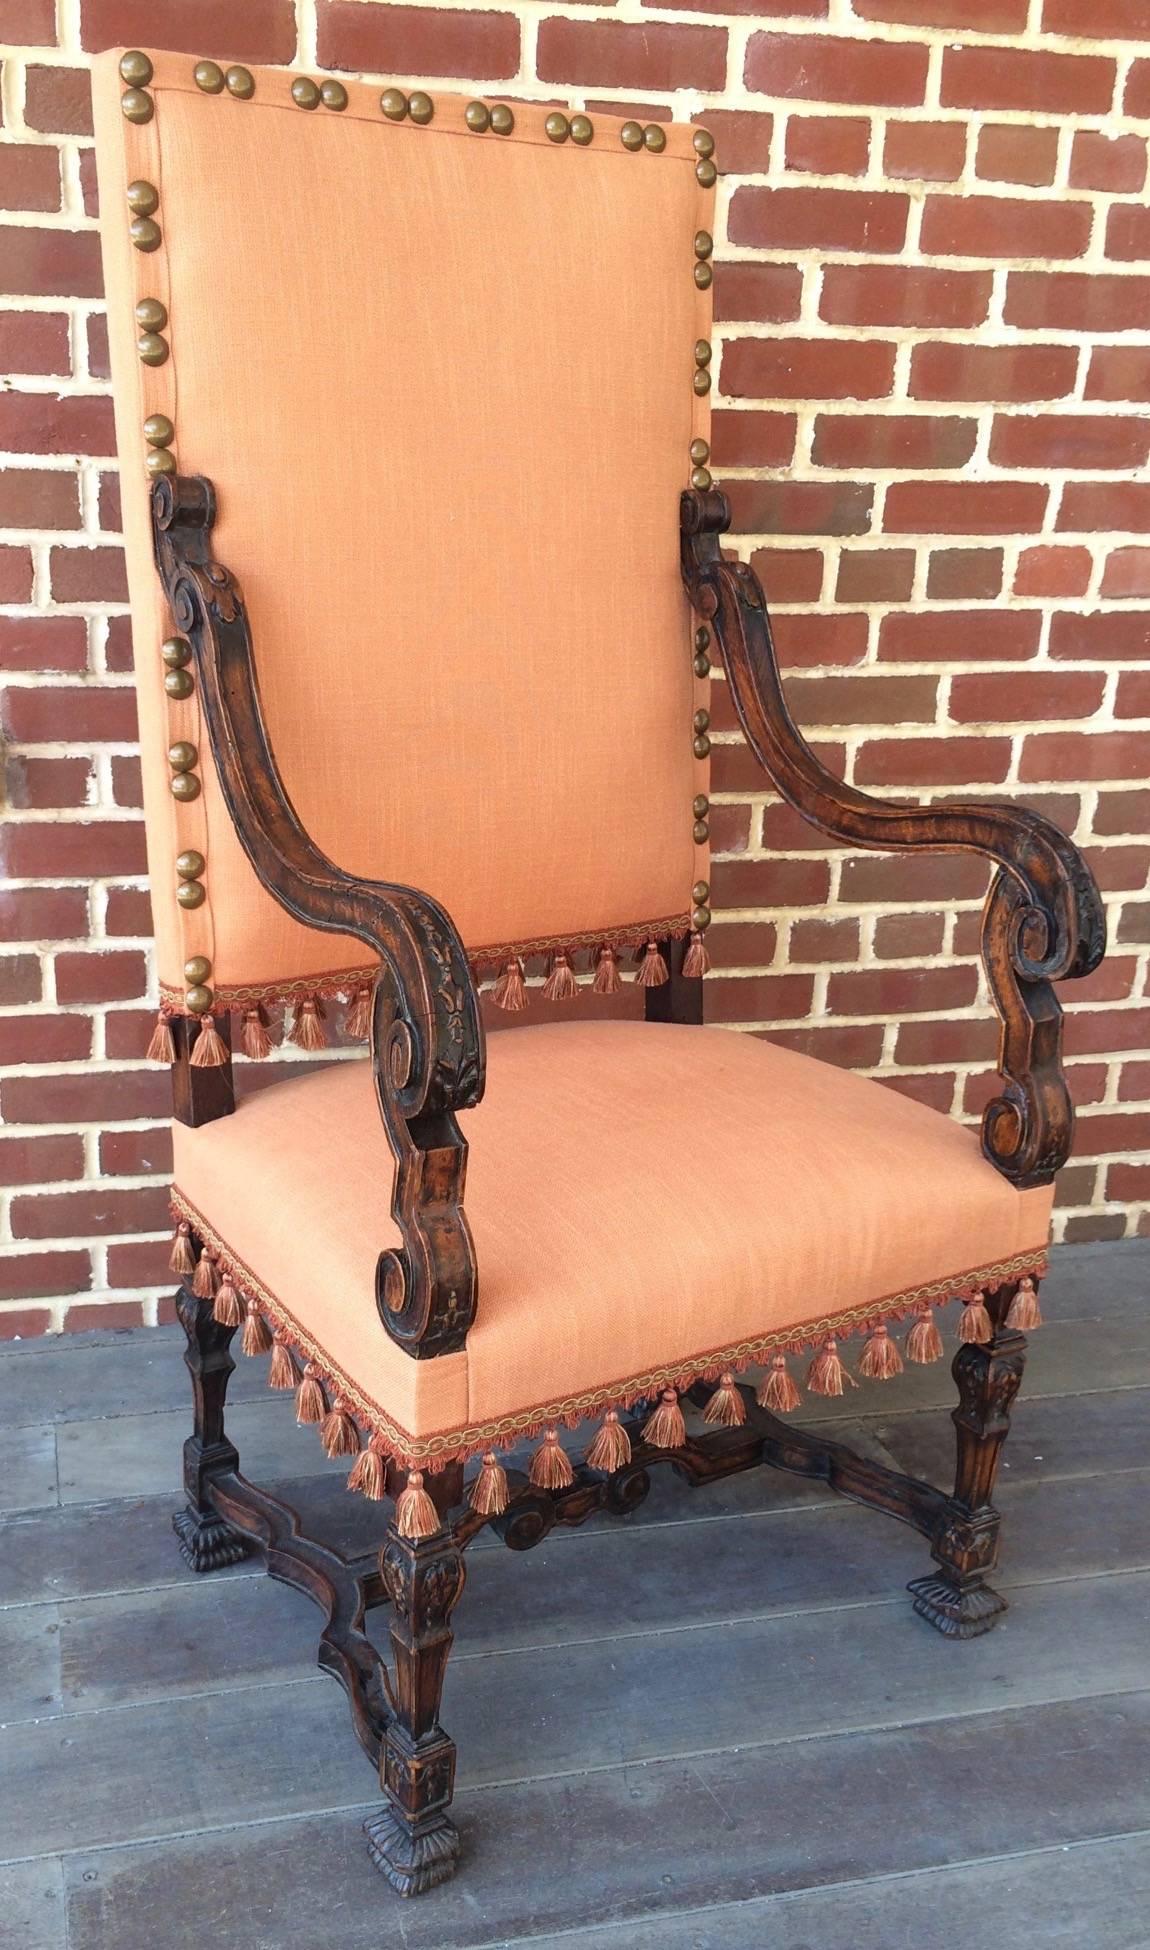 A wonderfully early form of a 17th century French Provincial Louis XIII period armchair. This Classic hall chair has a rectangular back and is made of deeply patinated Circassia walnut. The downward sweeping curved arms and bell flower decoration